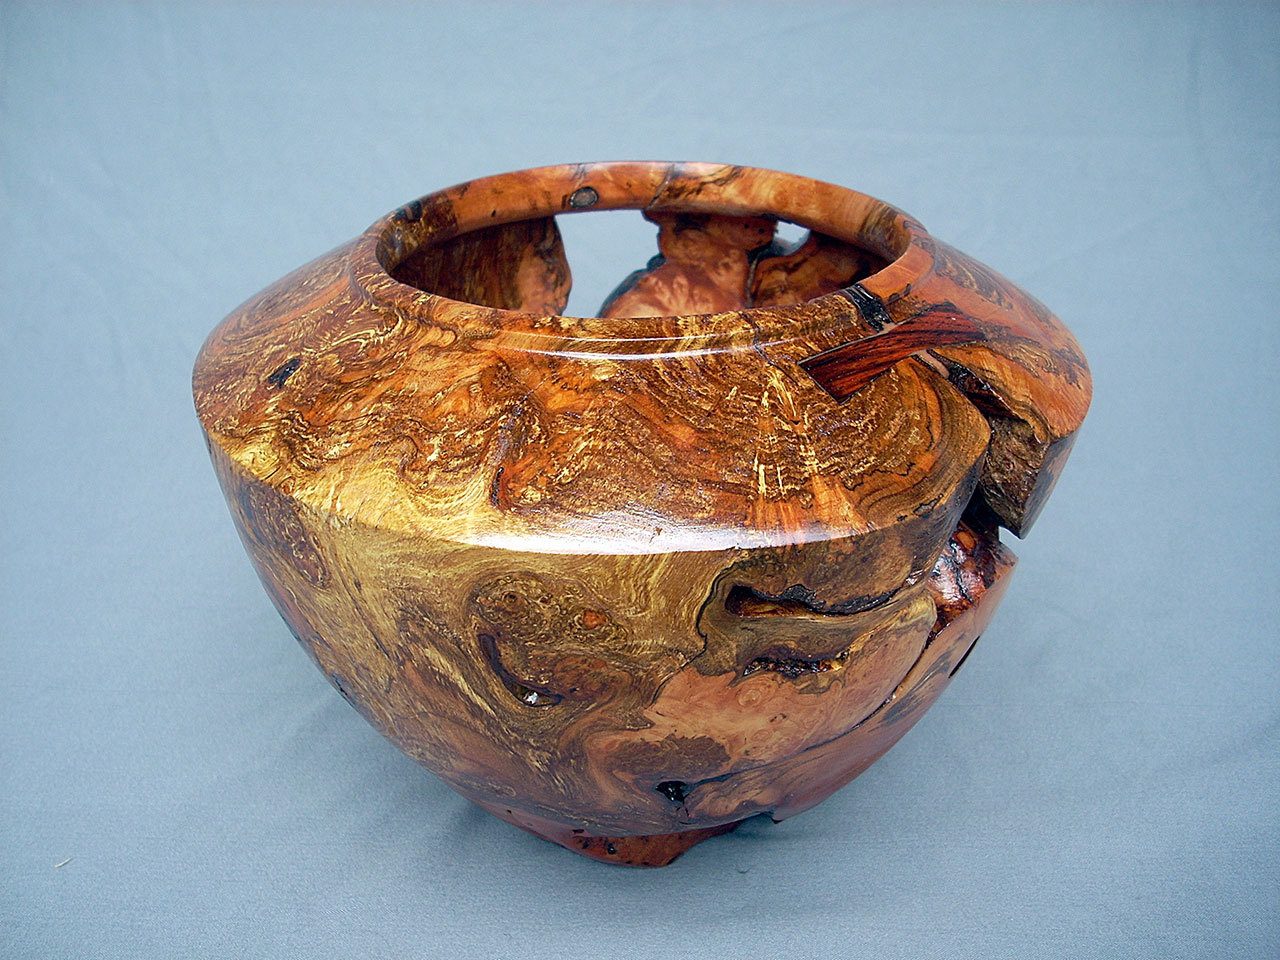 Finely craft wood pieces, such as this bowl by Ben Tyler, will be on display at the annual Port Townsend Woodworker’s Show this weekend.